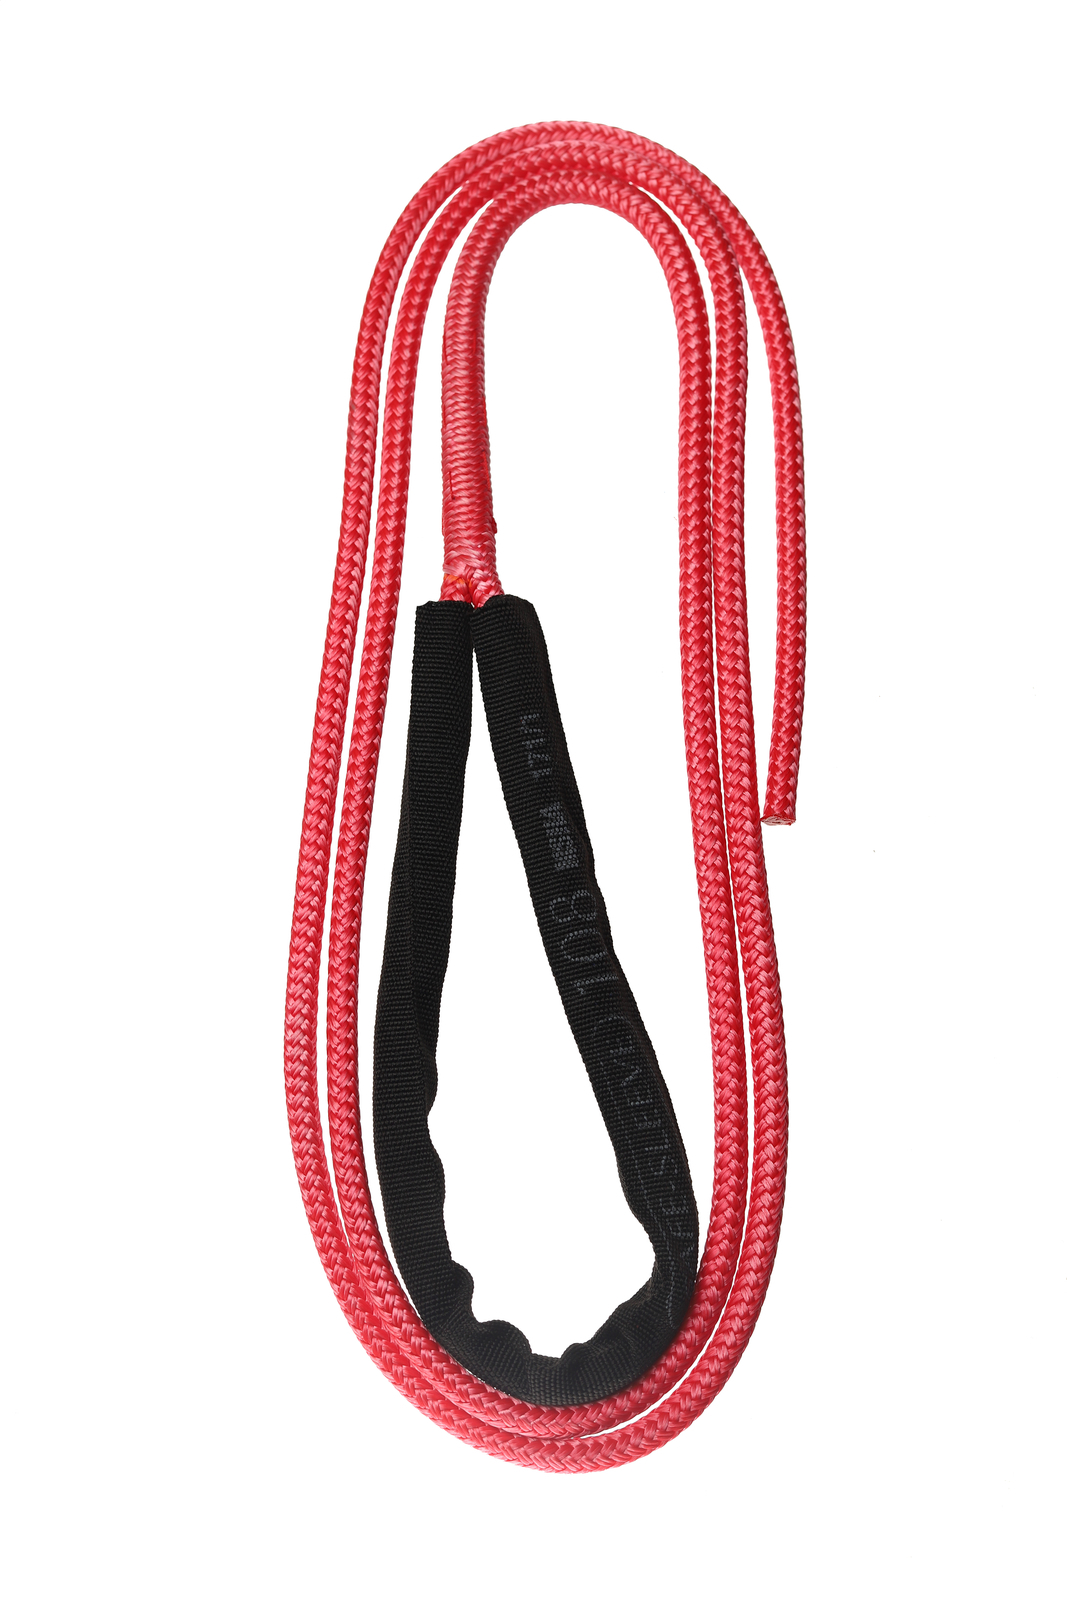 Polyester Coated Double Braid Dead Eye Sling